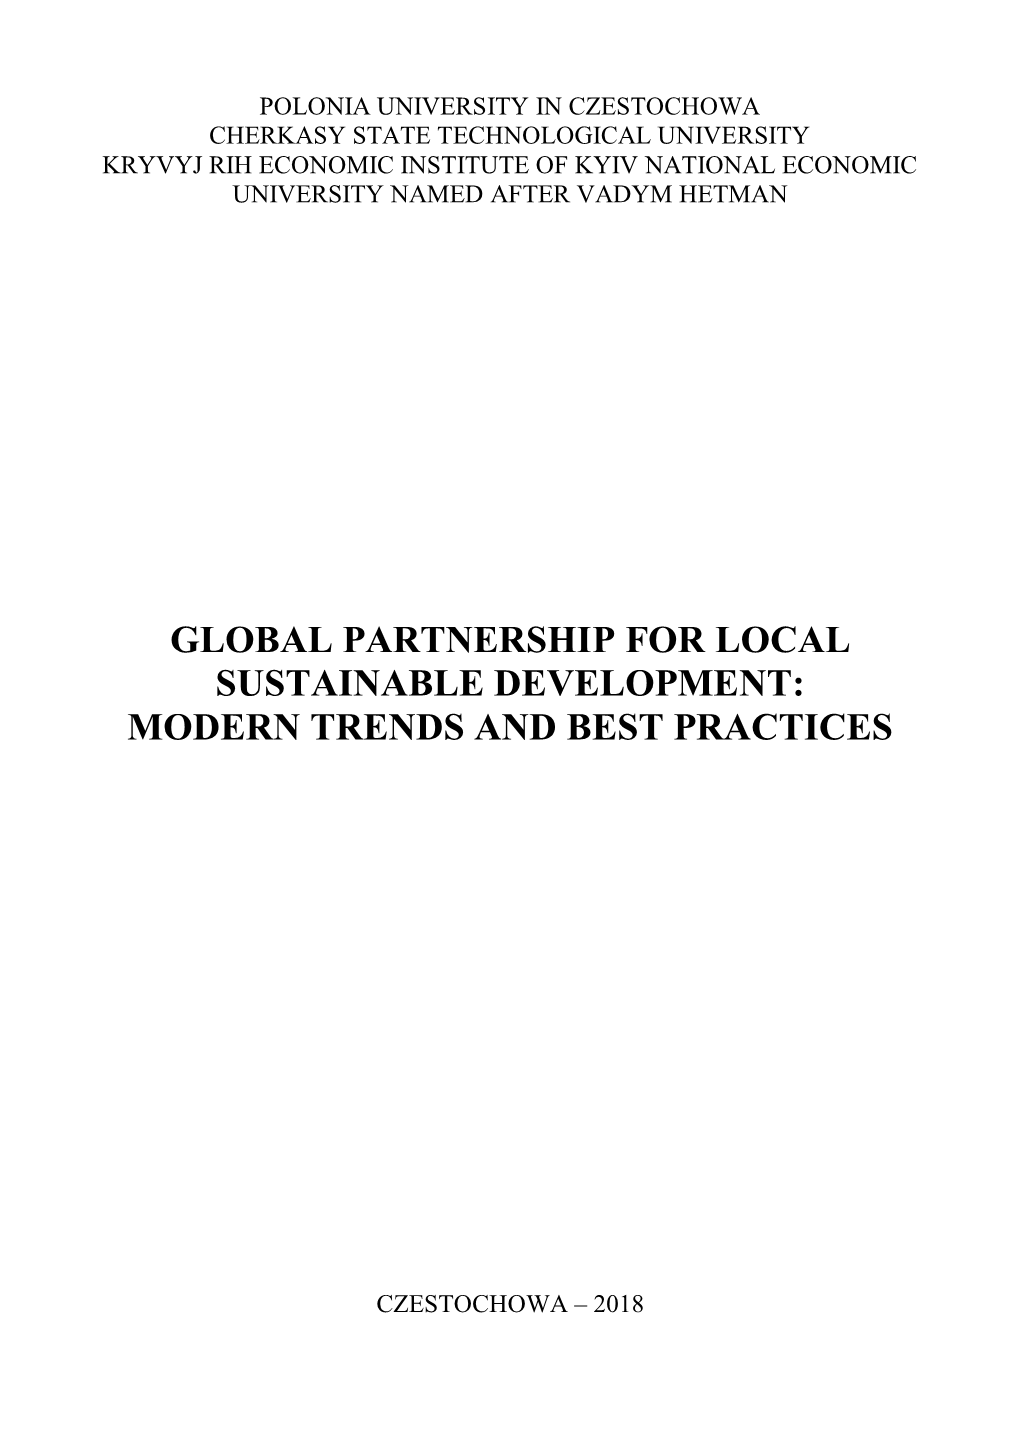 Global Partnership for Local Sustainable Development: Modern Trends and Best Practices